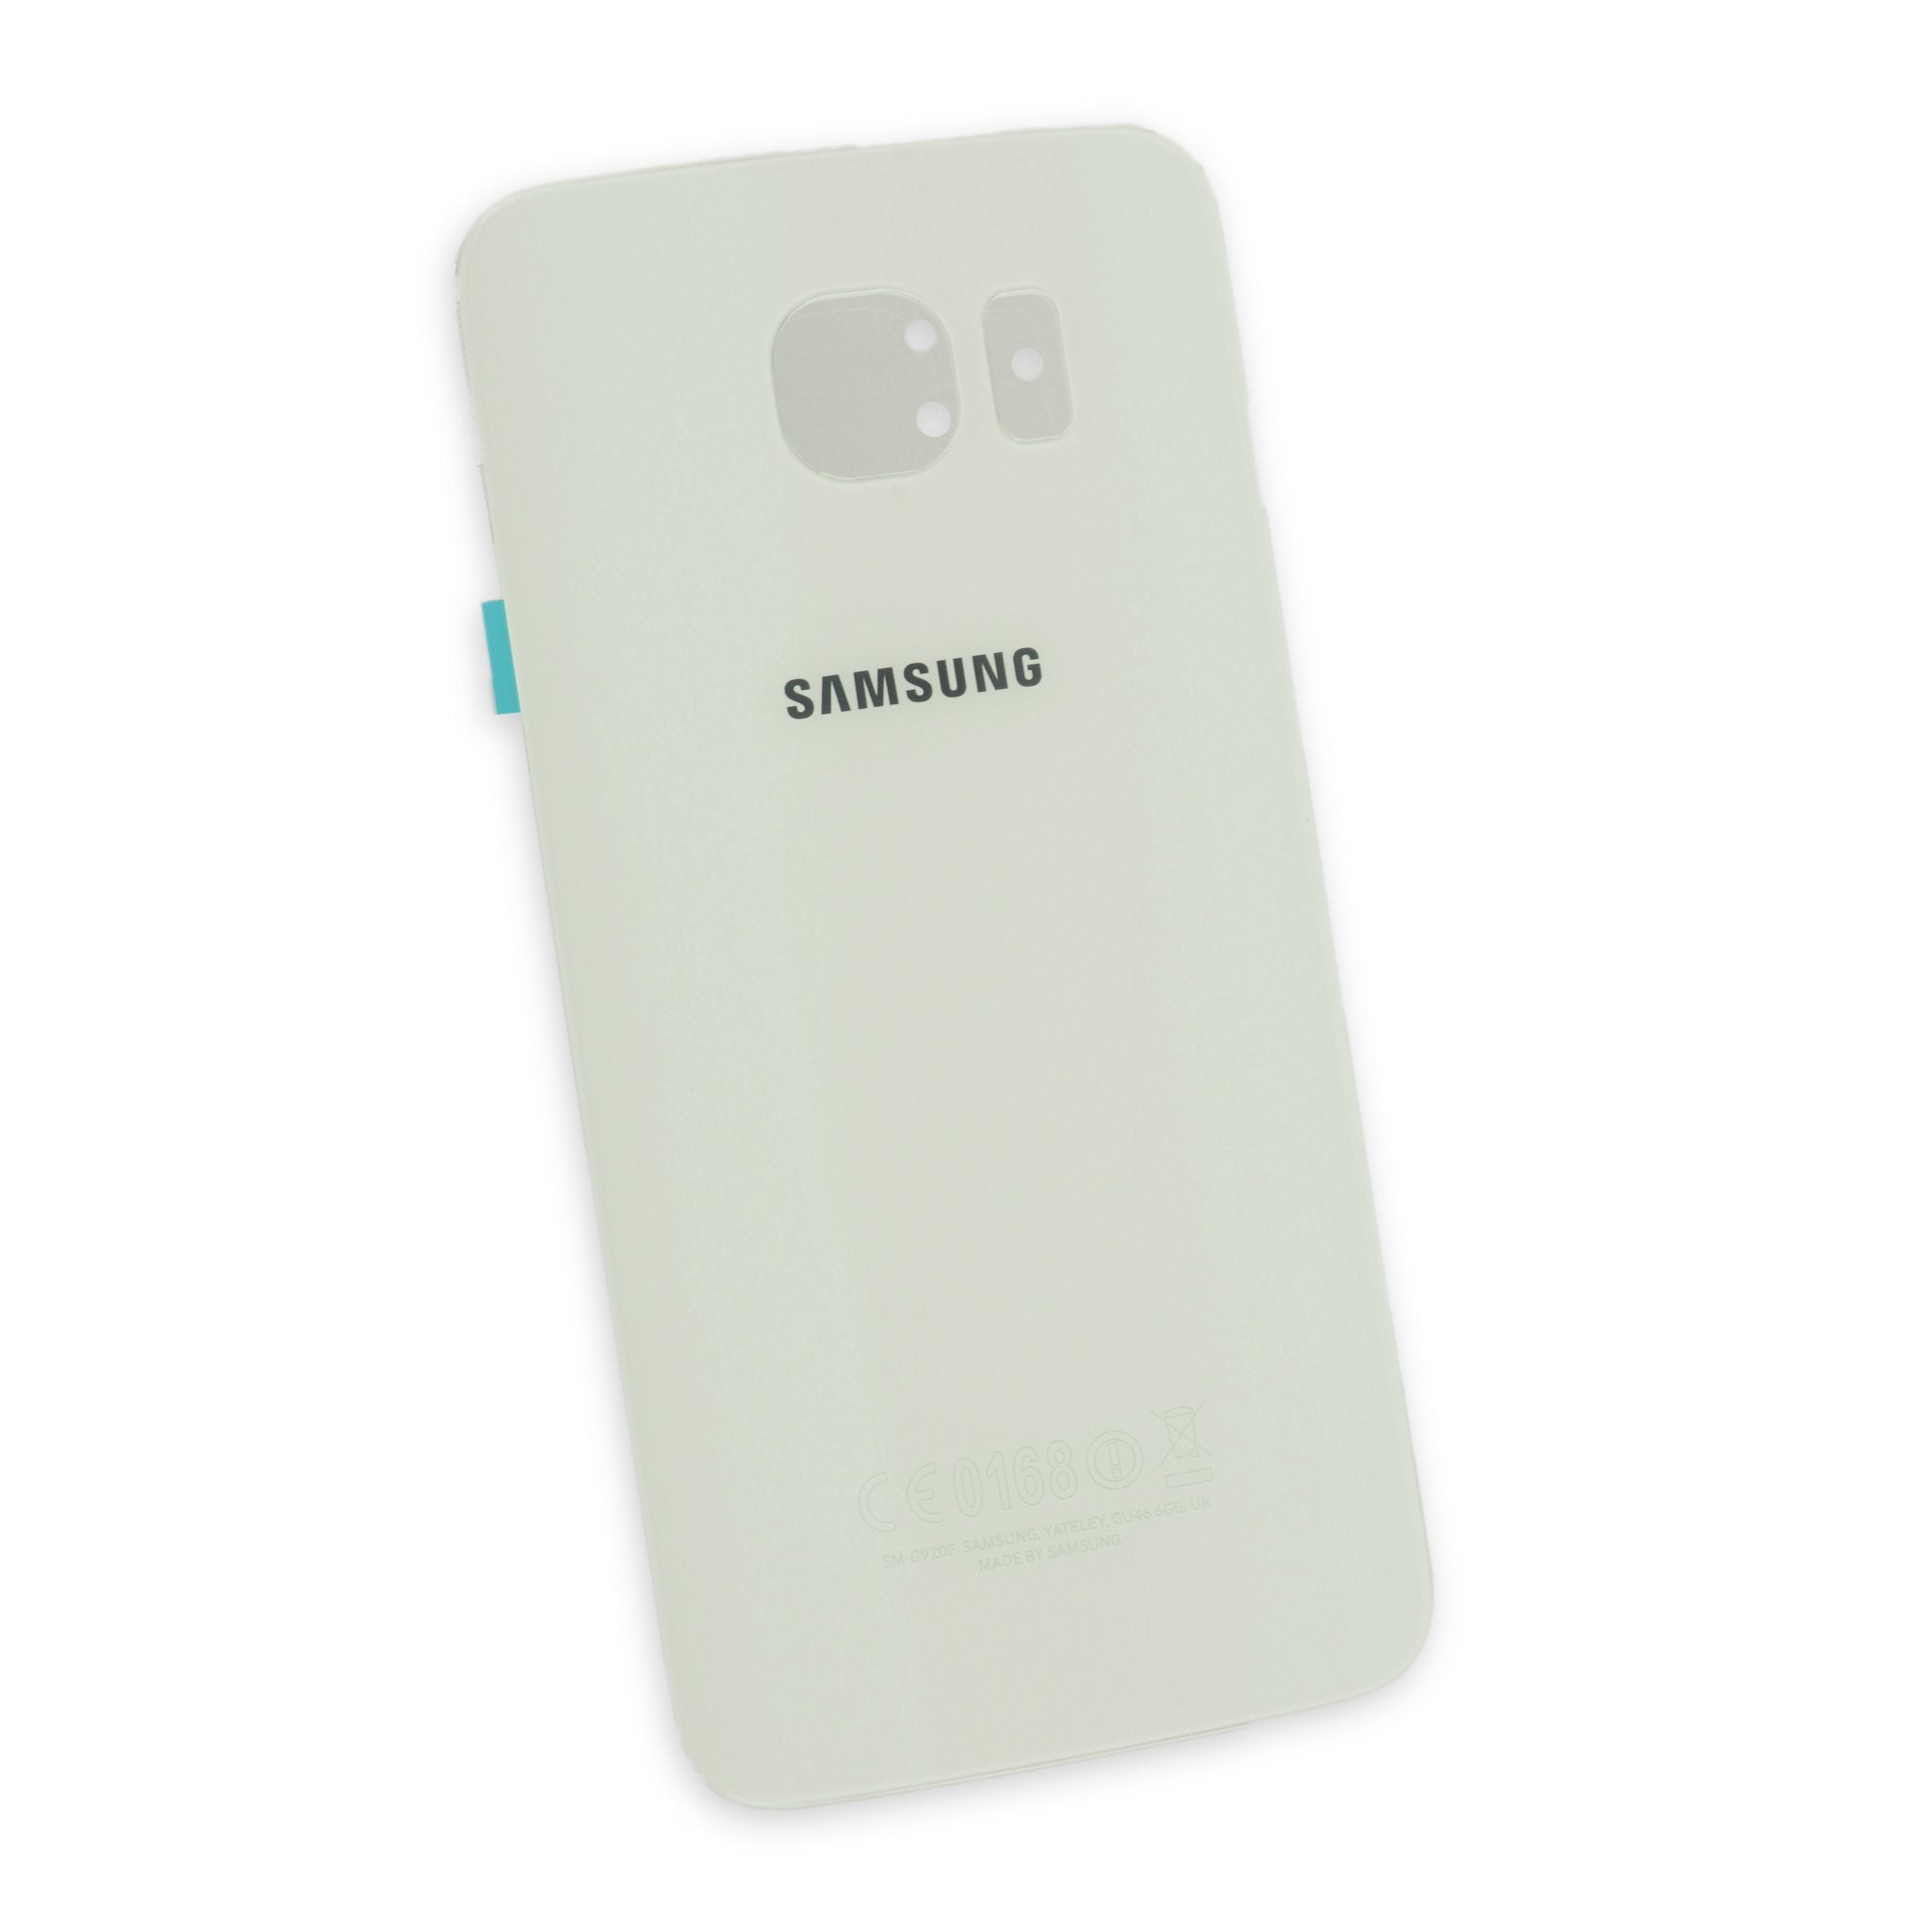 Galaxy S6 Rear Glass Panel/Cover - Original White New Part Only